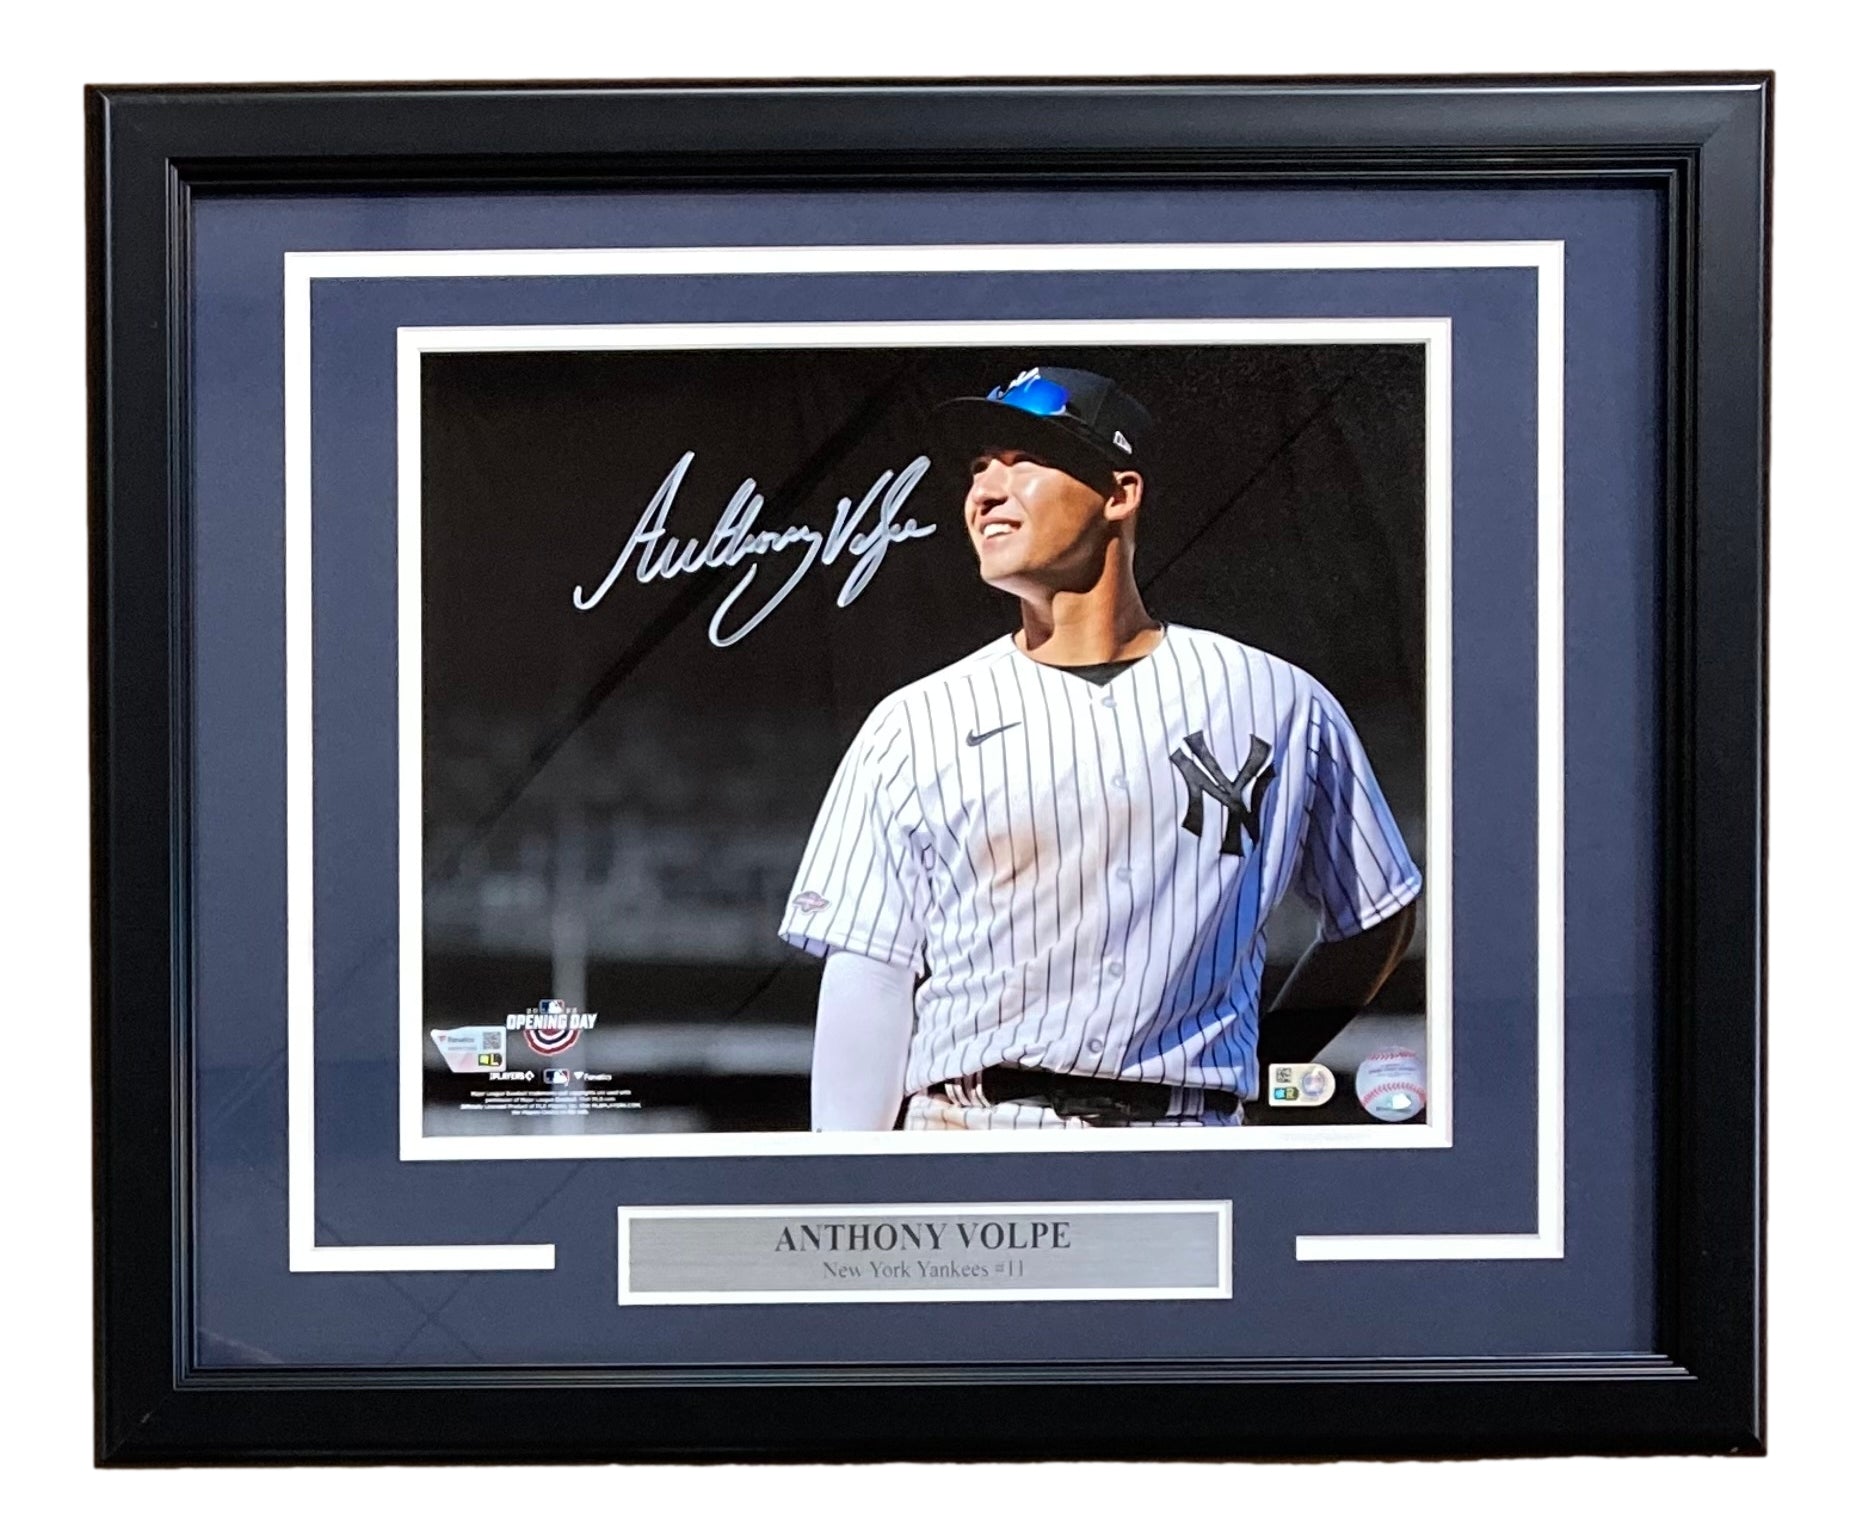 Framed Anthony Volpe New York Yankees Autographed 8 x 10 Pinstripe Jersey  Batting Stance Photograph